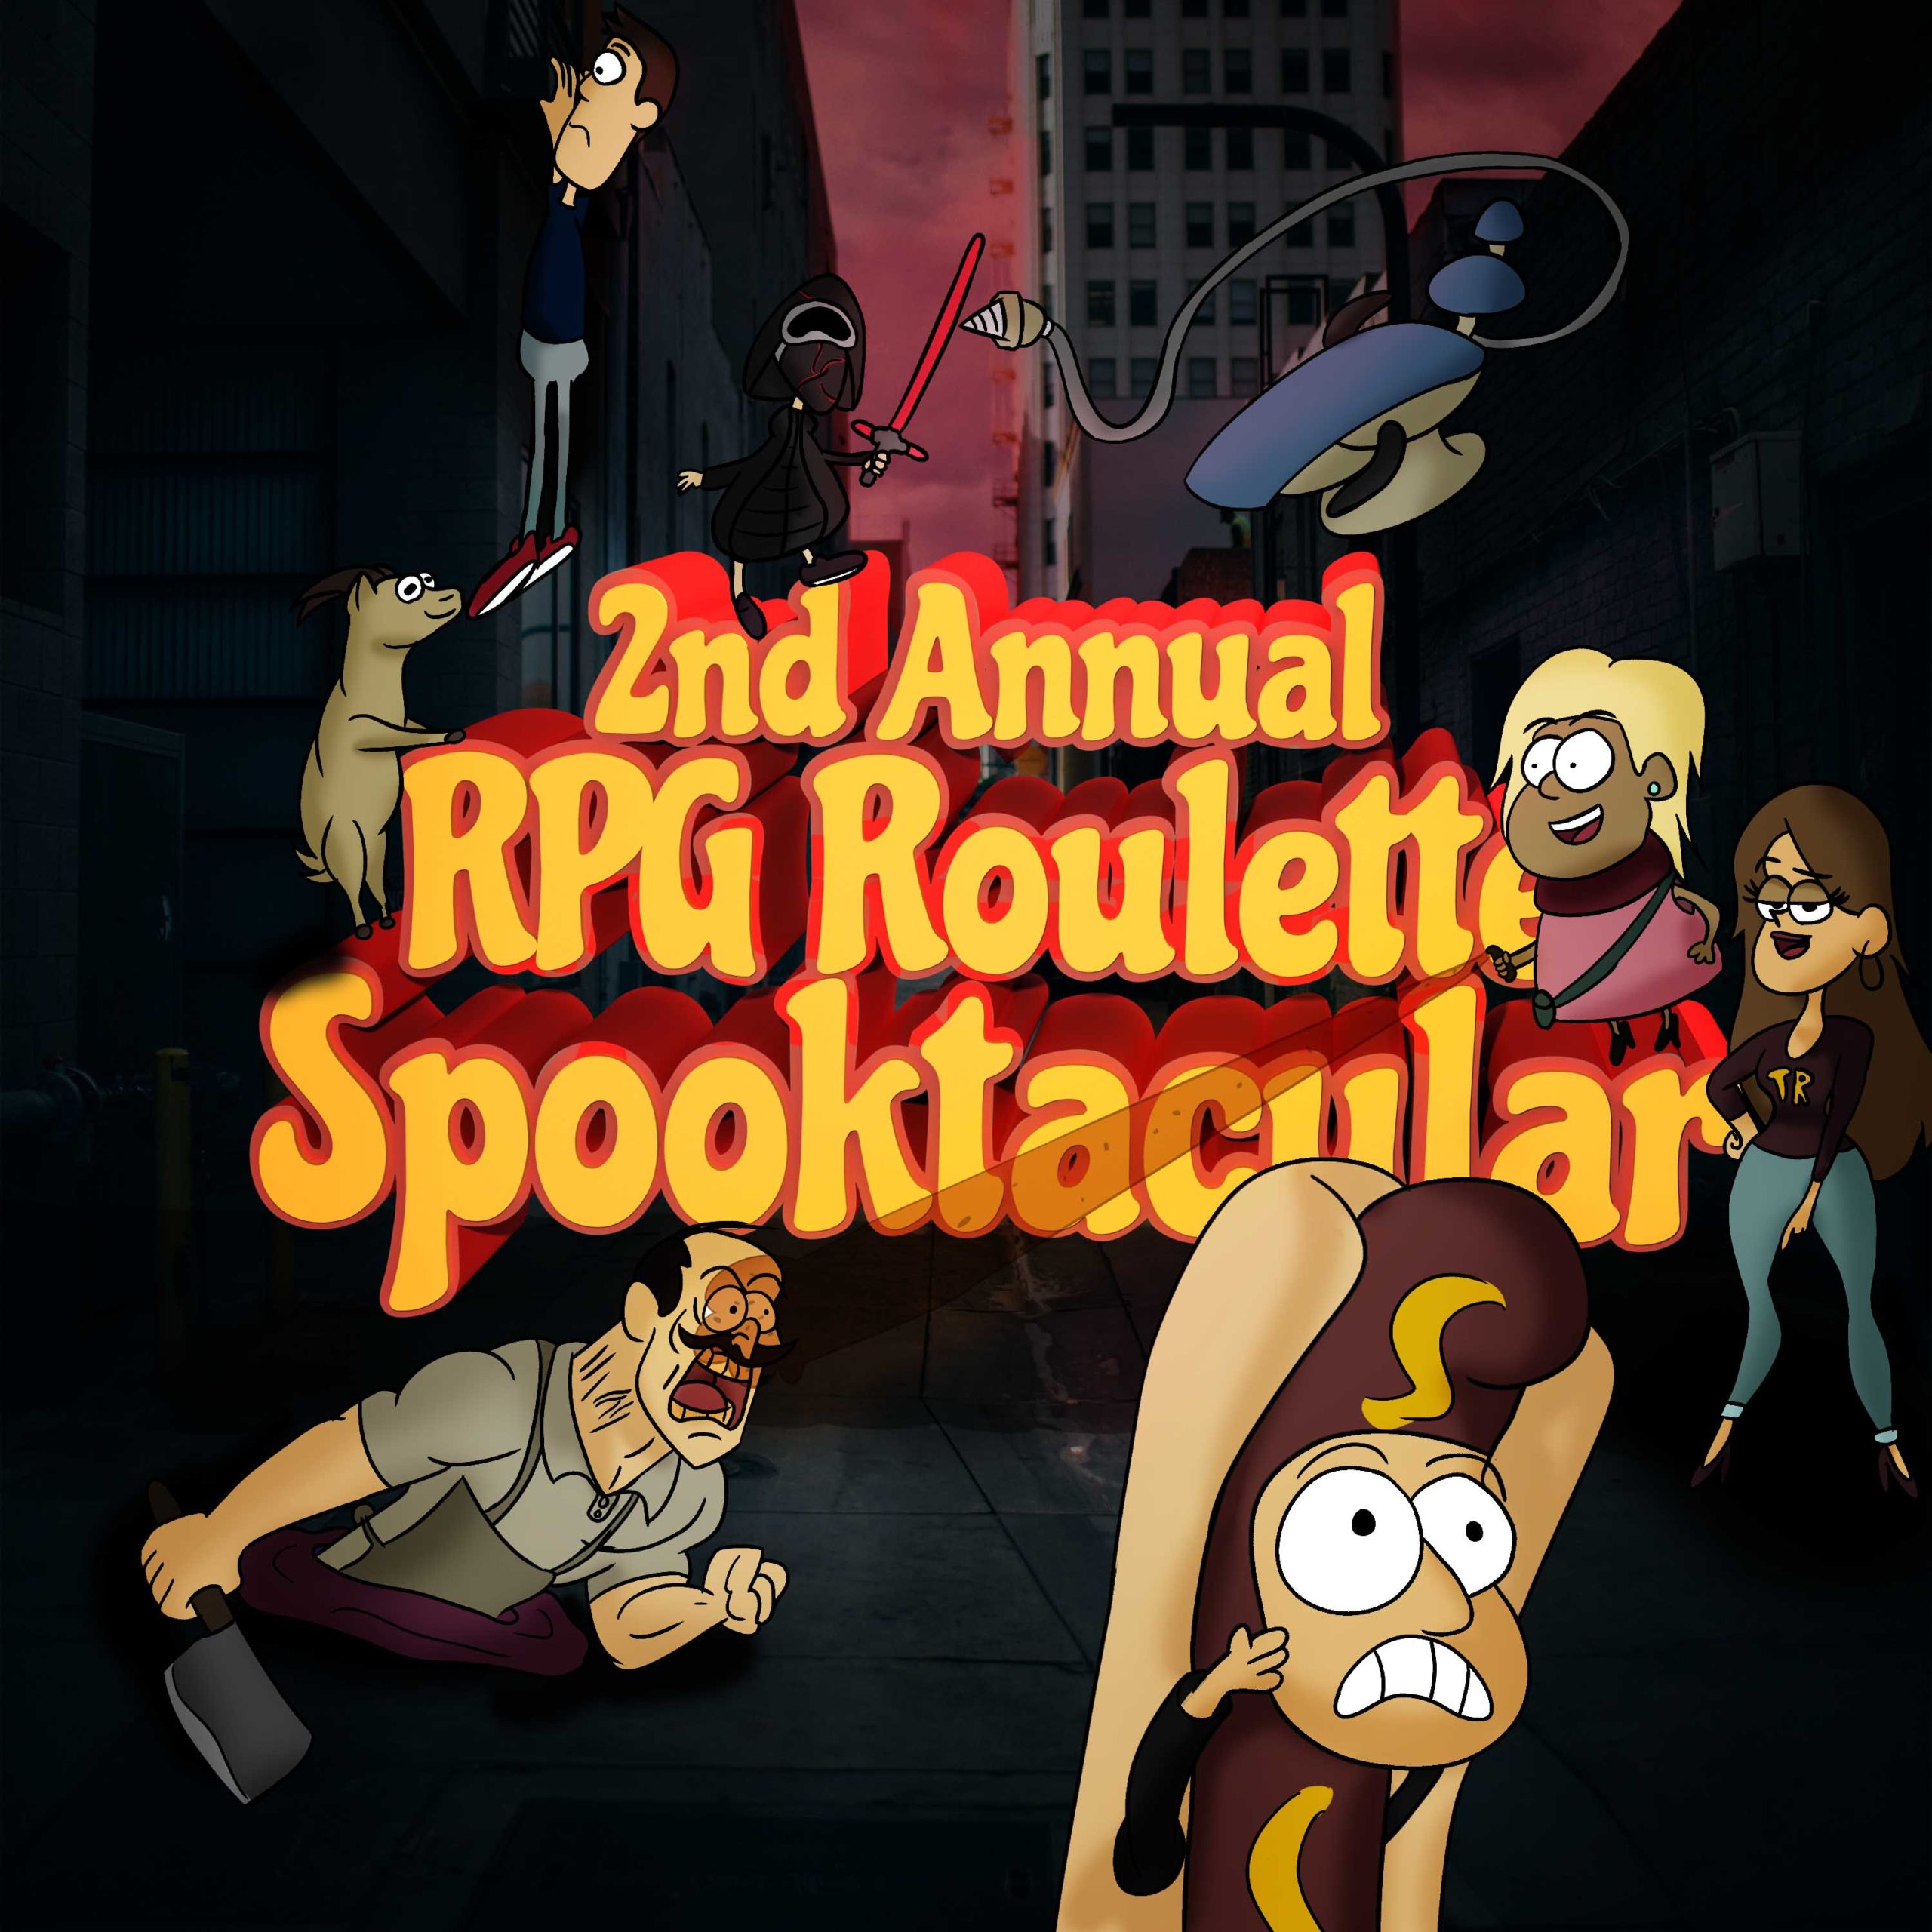 The 2nd Annual RPG Roulette Spooktacular!